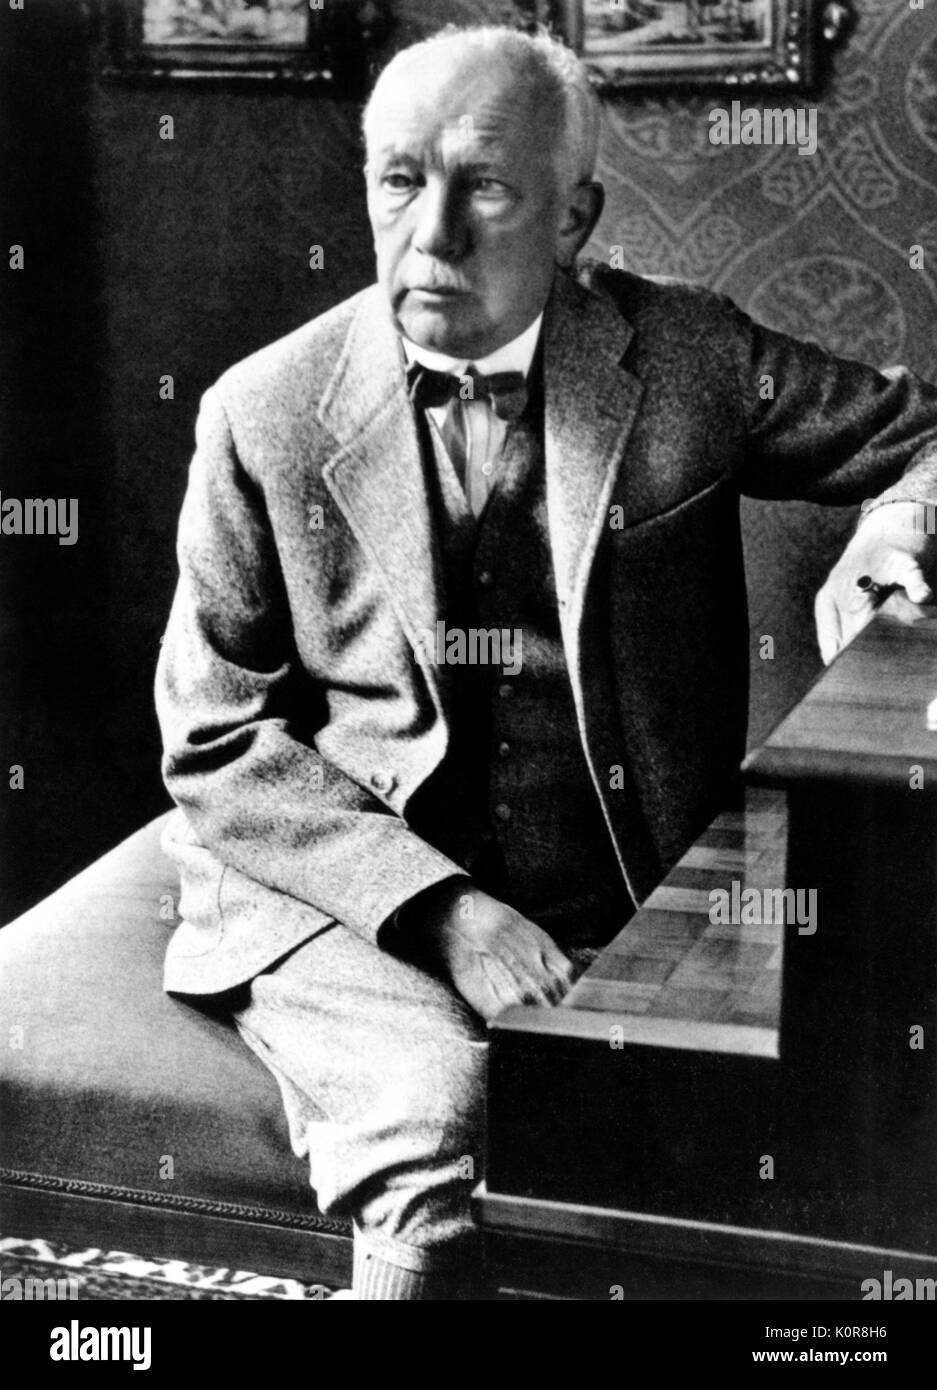 Richard  Strauss seated at the piano wearing plus fours  c.1920s. German composer and conductor. 11 June 1864 - 8 September 1949. Stock Photo